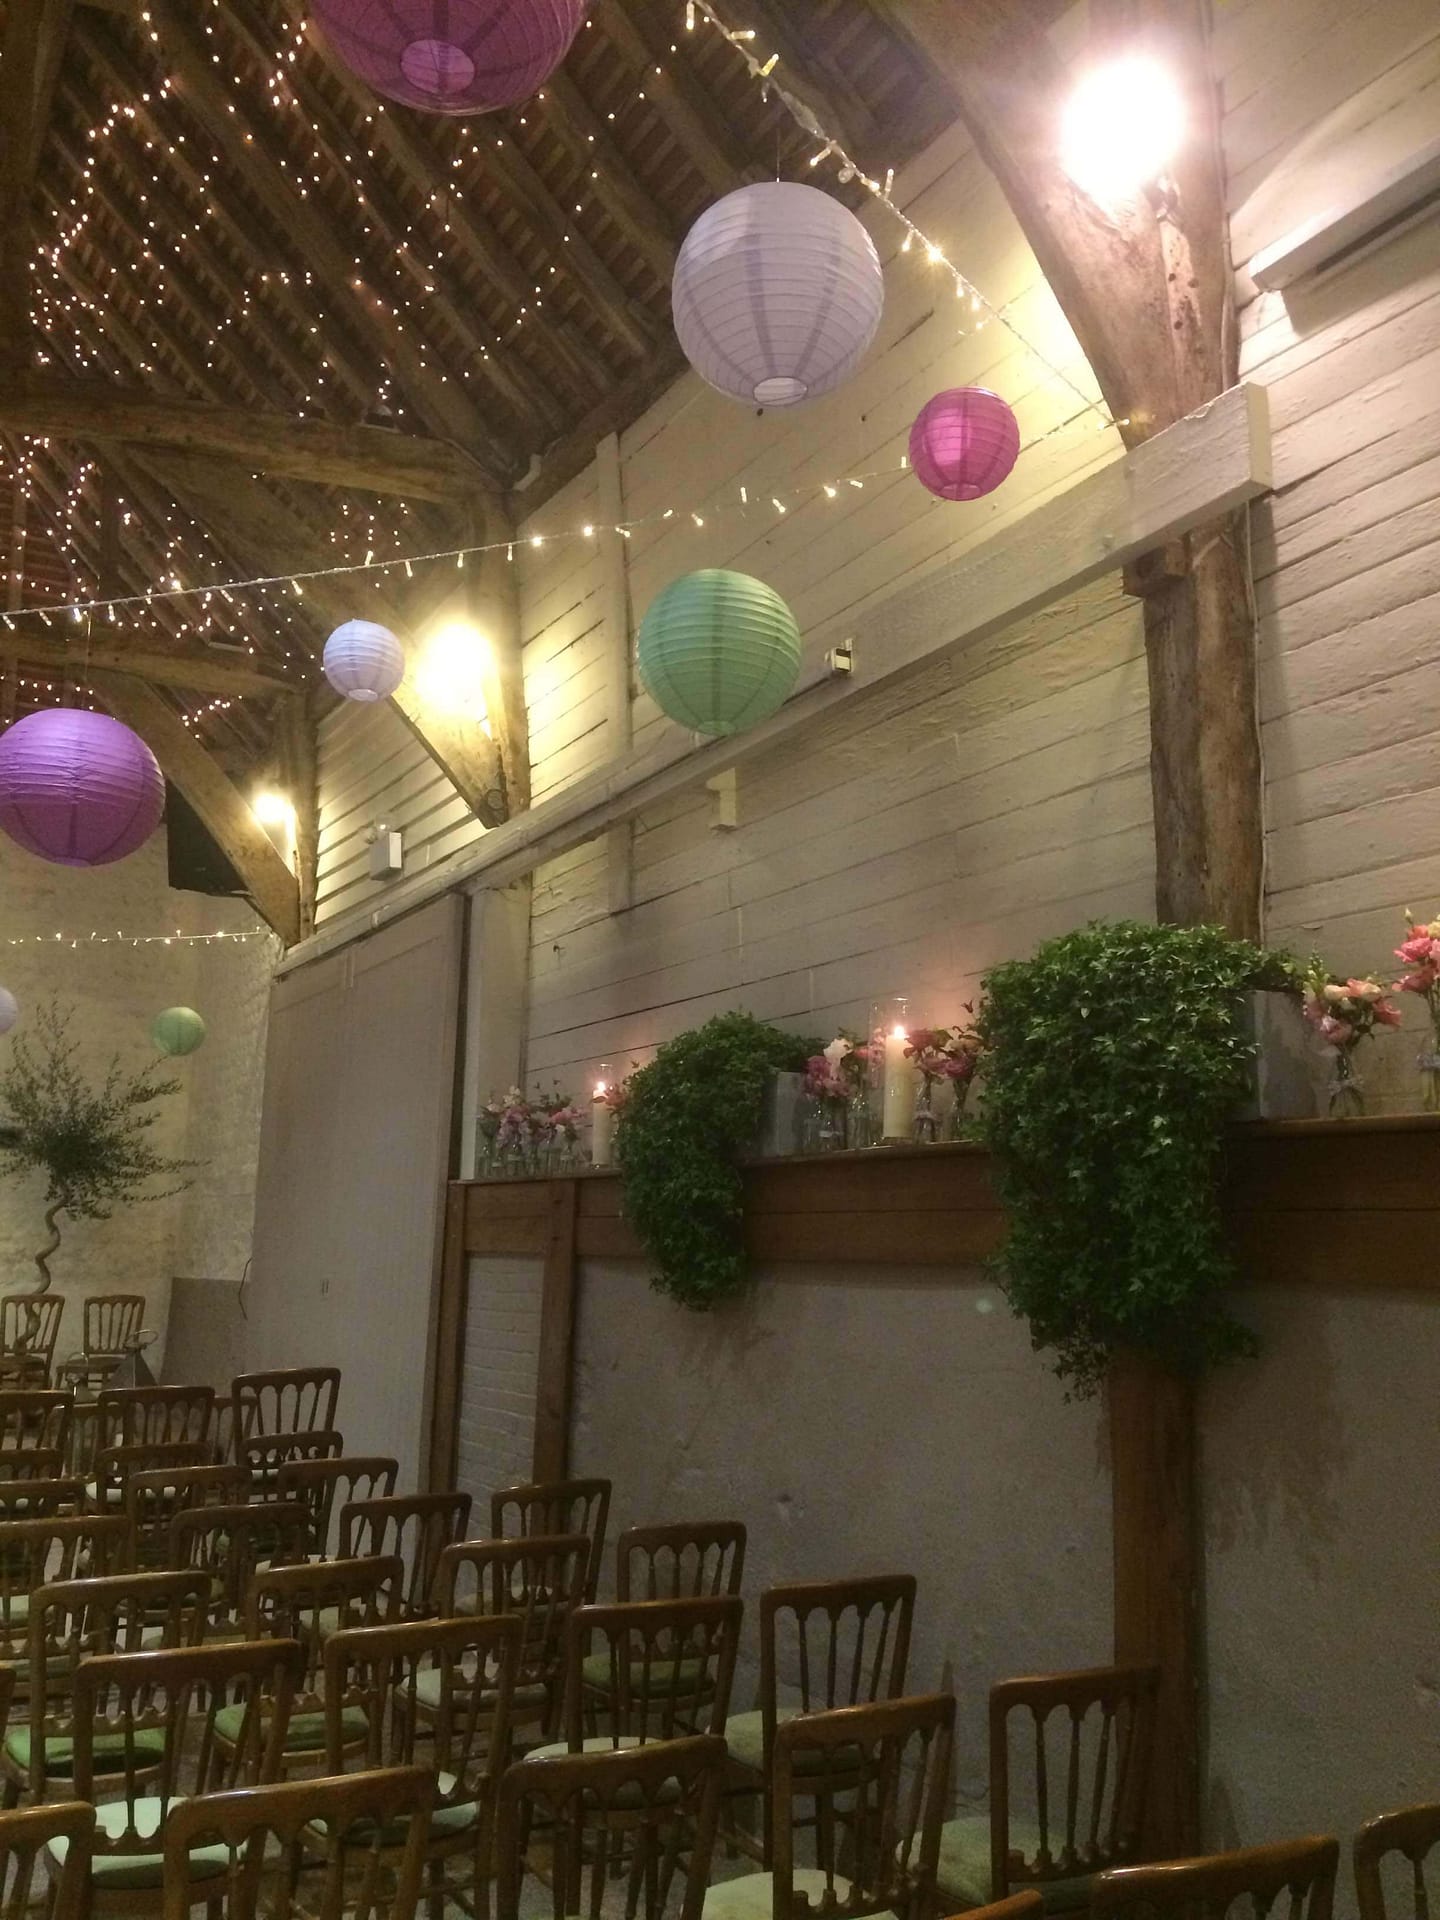 pangdean barn with hanging lanterns and flowers